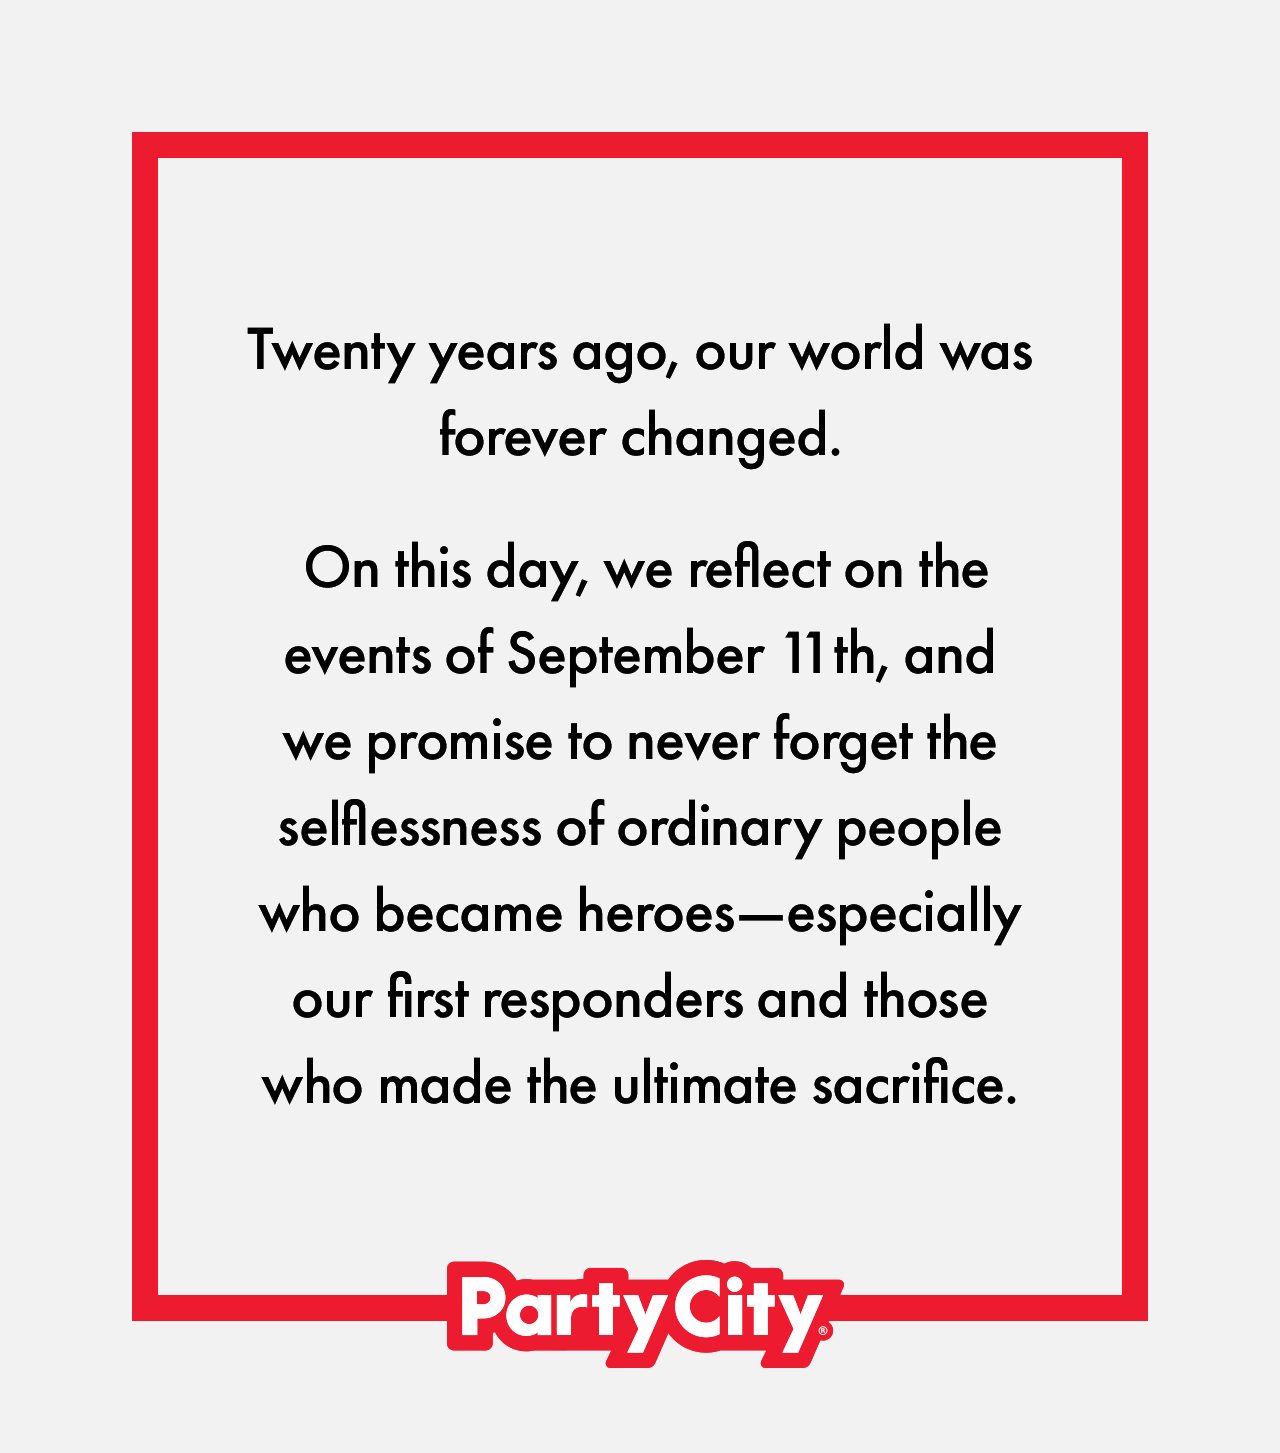 Twenty years ago, our world was forever changed. On this day, we reflect on the events of September 11th, and we promise to never forget the selflessness of ordinary people who became heroes—especially our first responders and those who made the ultimate sacrifice.